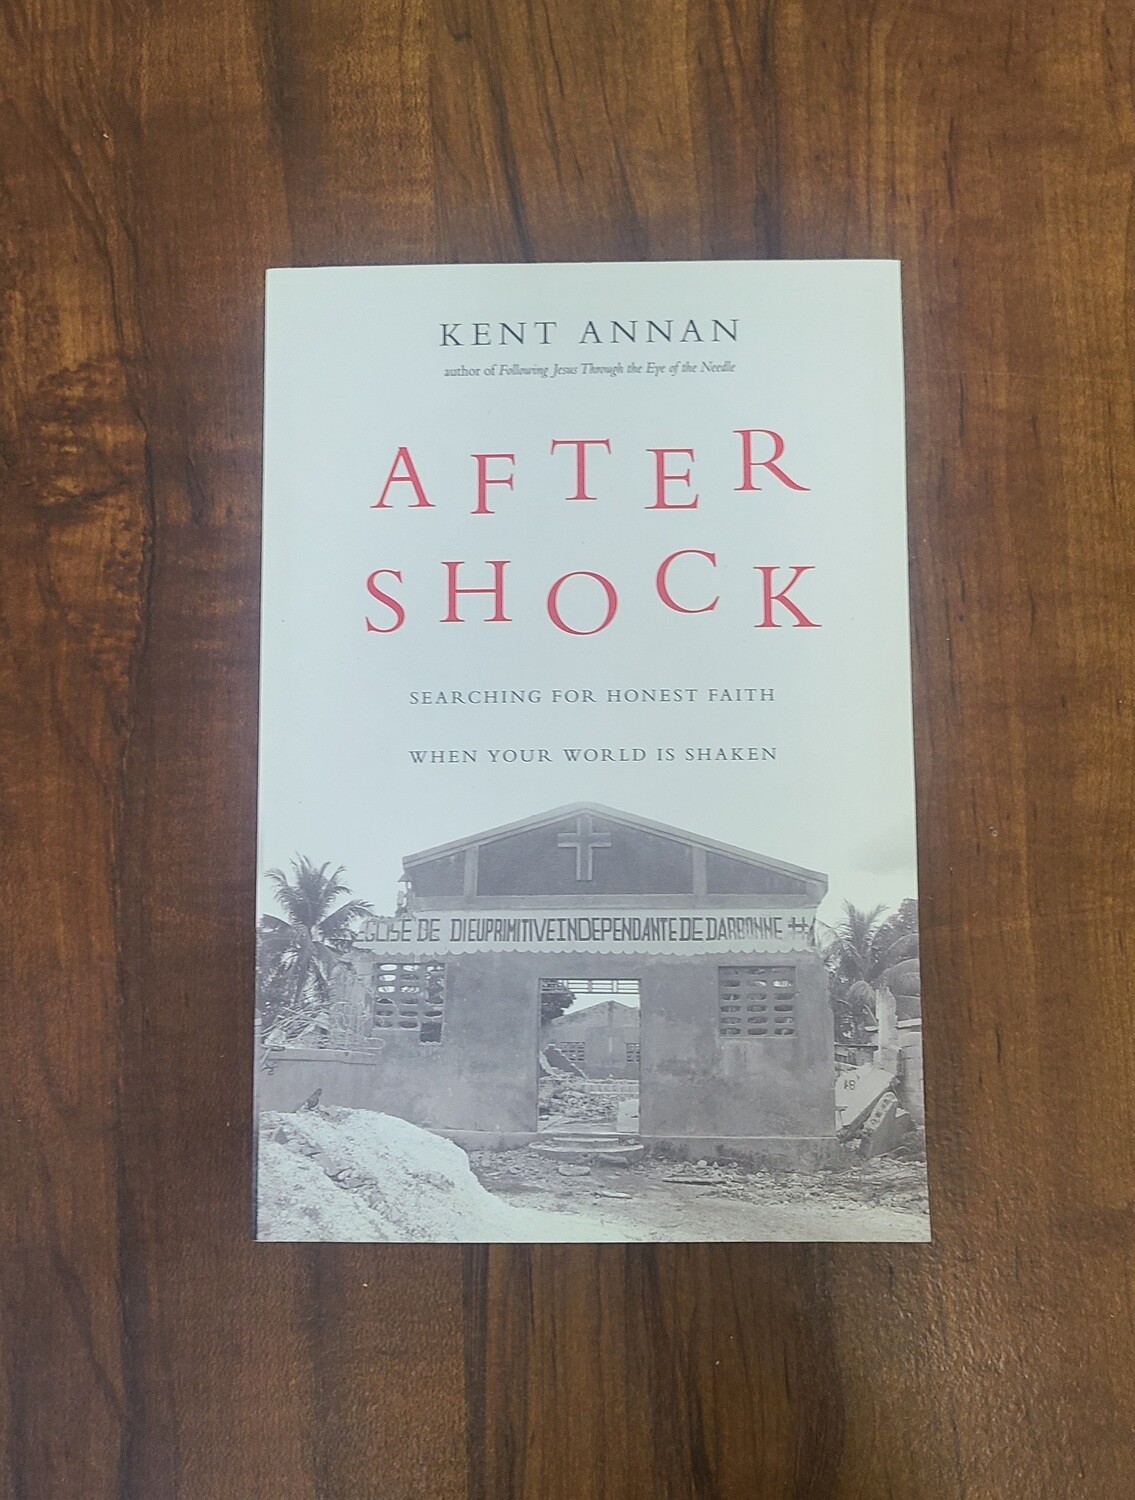 After Shock: Searching for Honest Faith when Your World is Shaken by Kent Annan